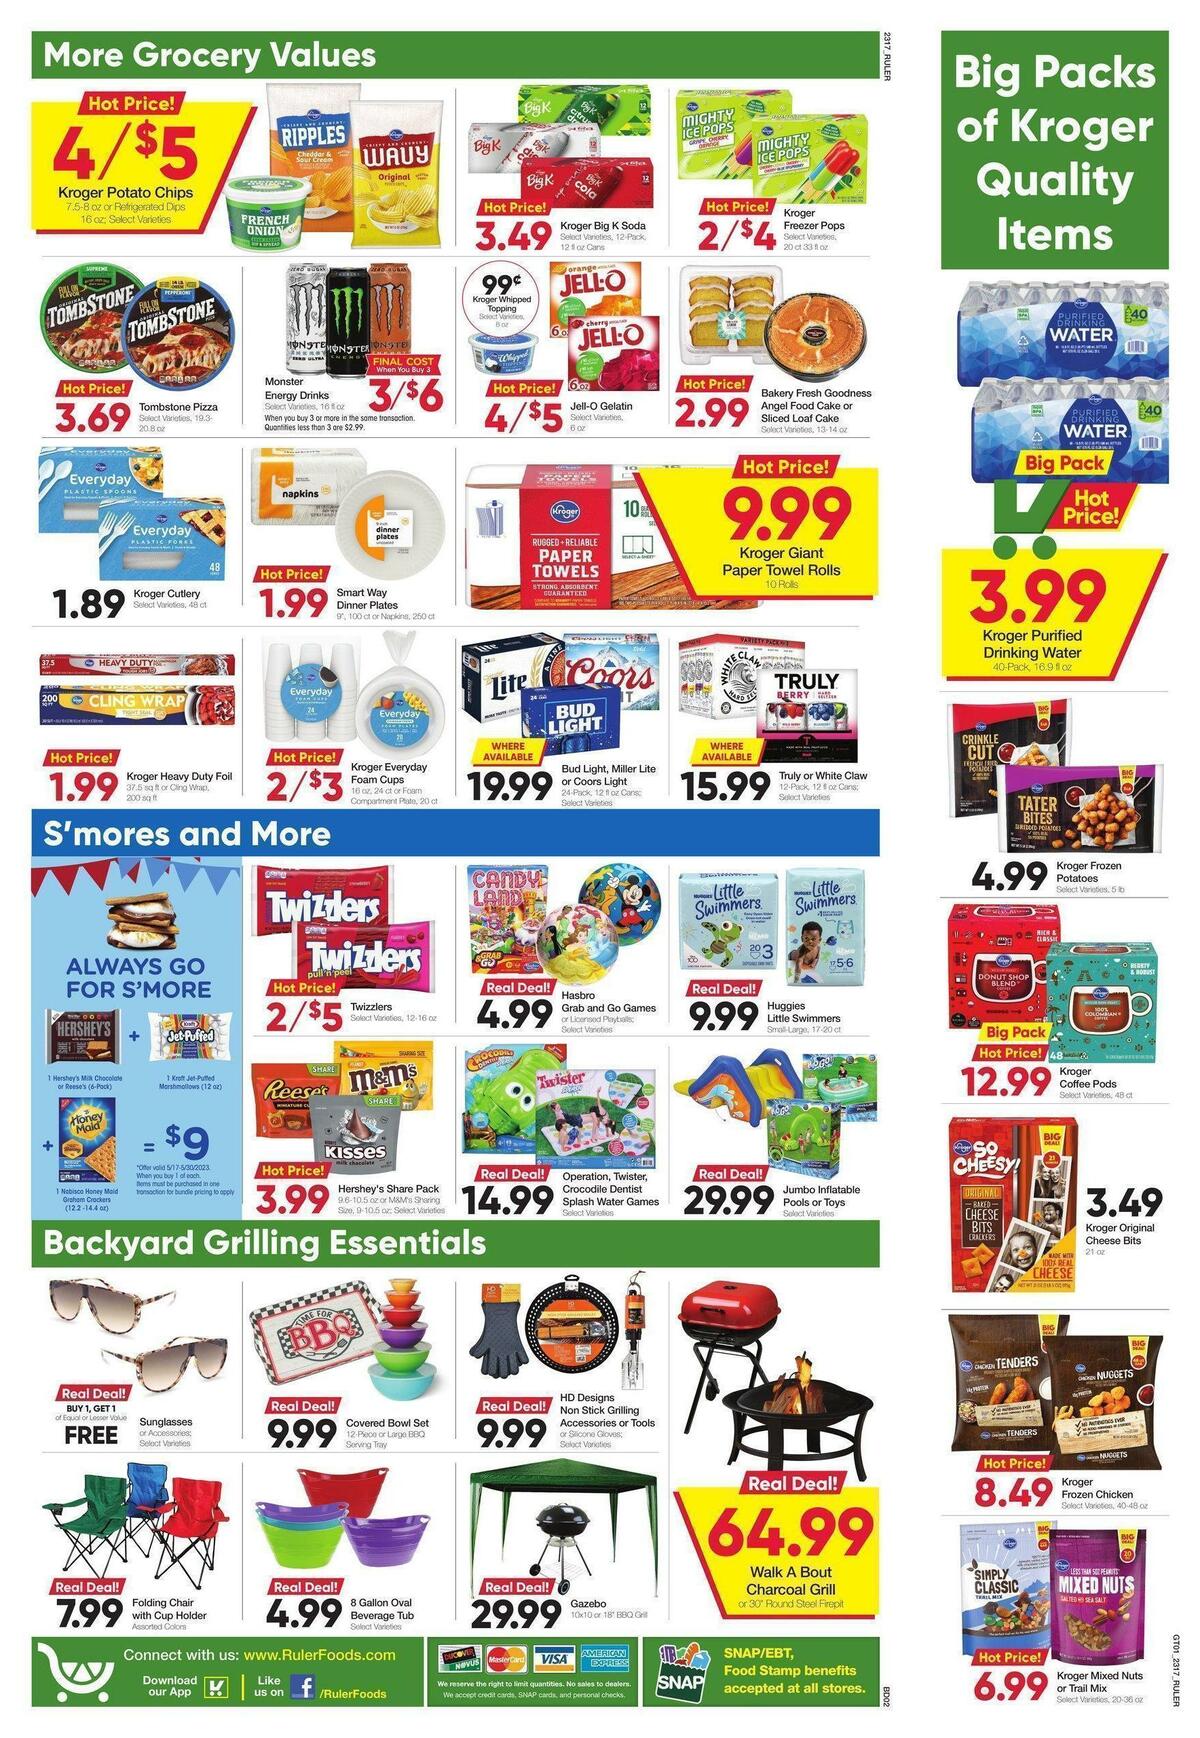 Ruler Foods Weekly Ad from May 24